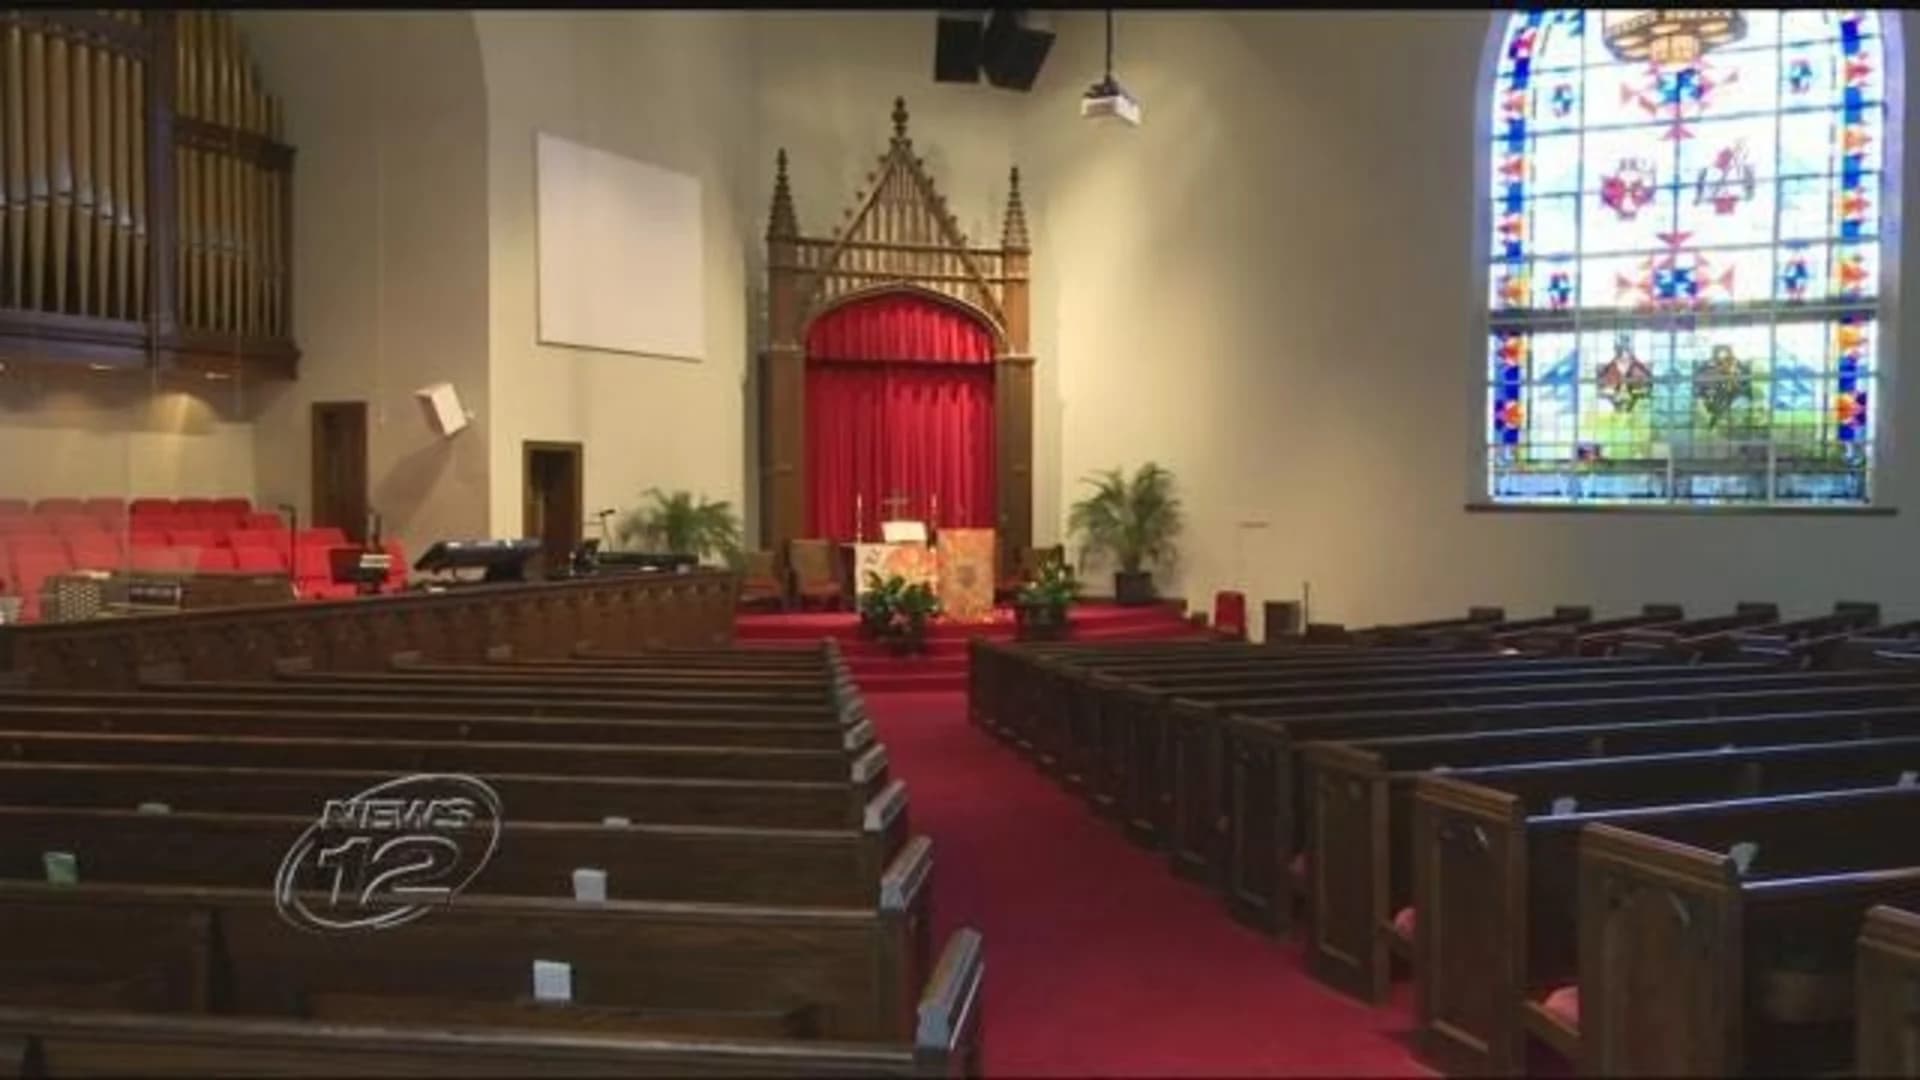 Mount Vernon’s Grace Baptist Church withstands test of time